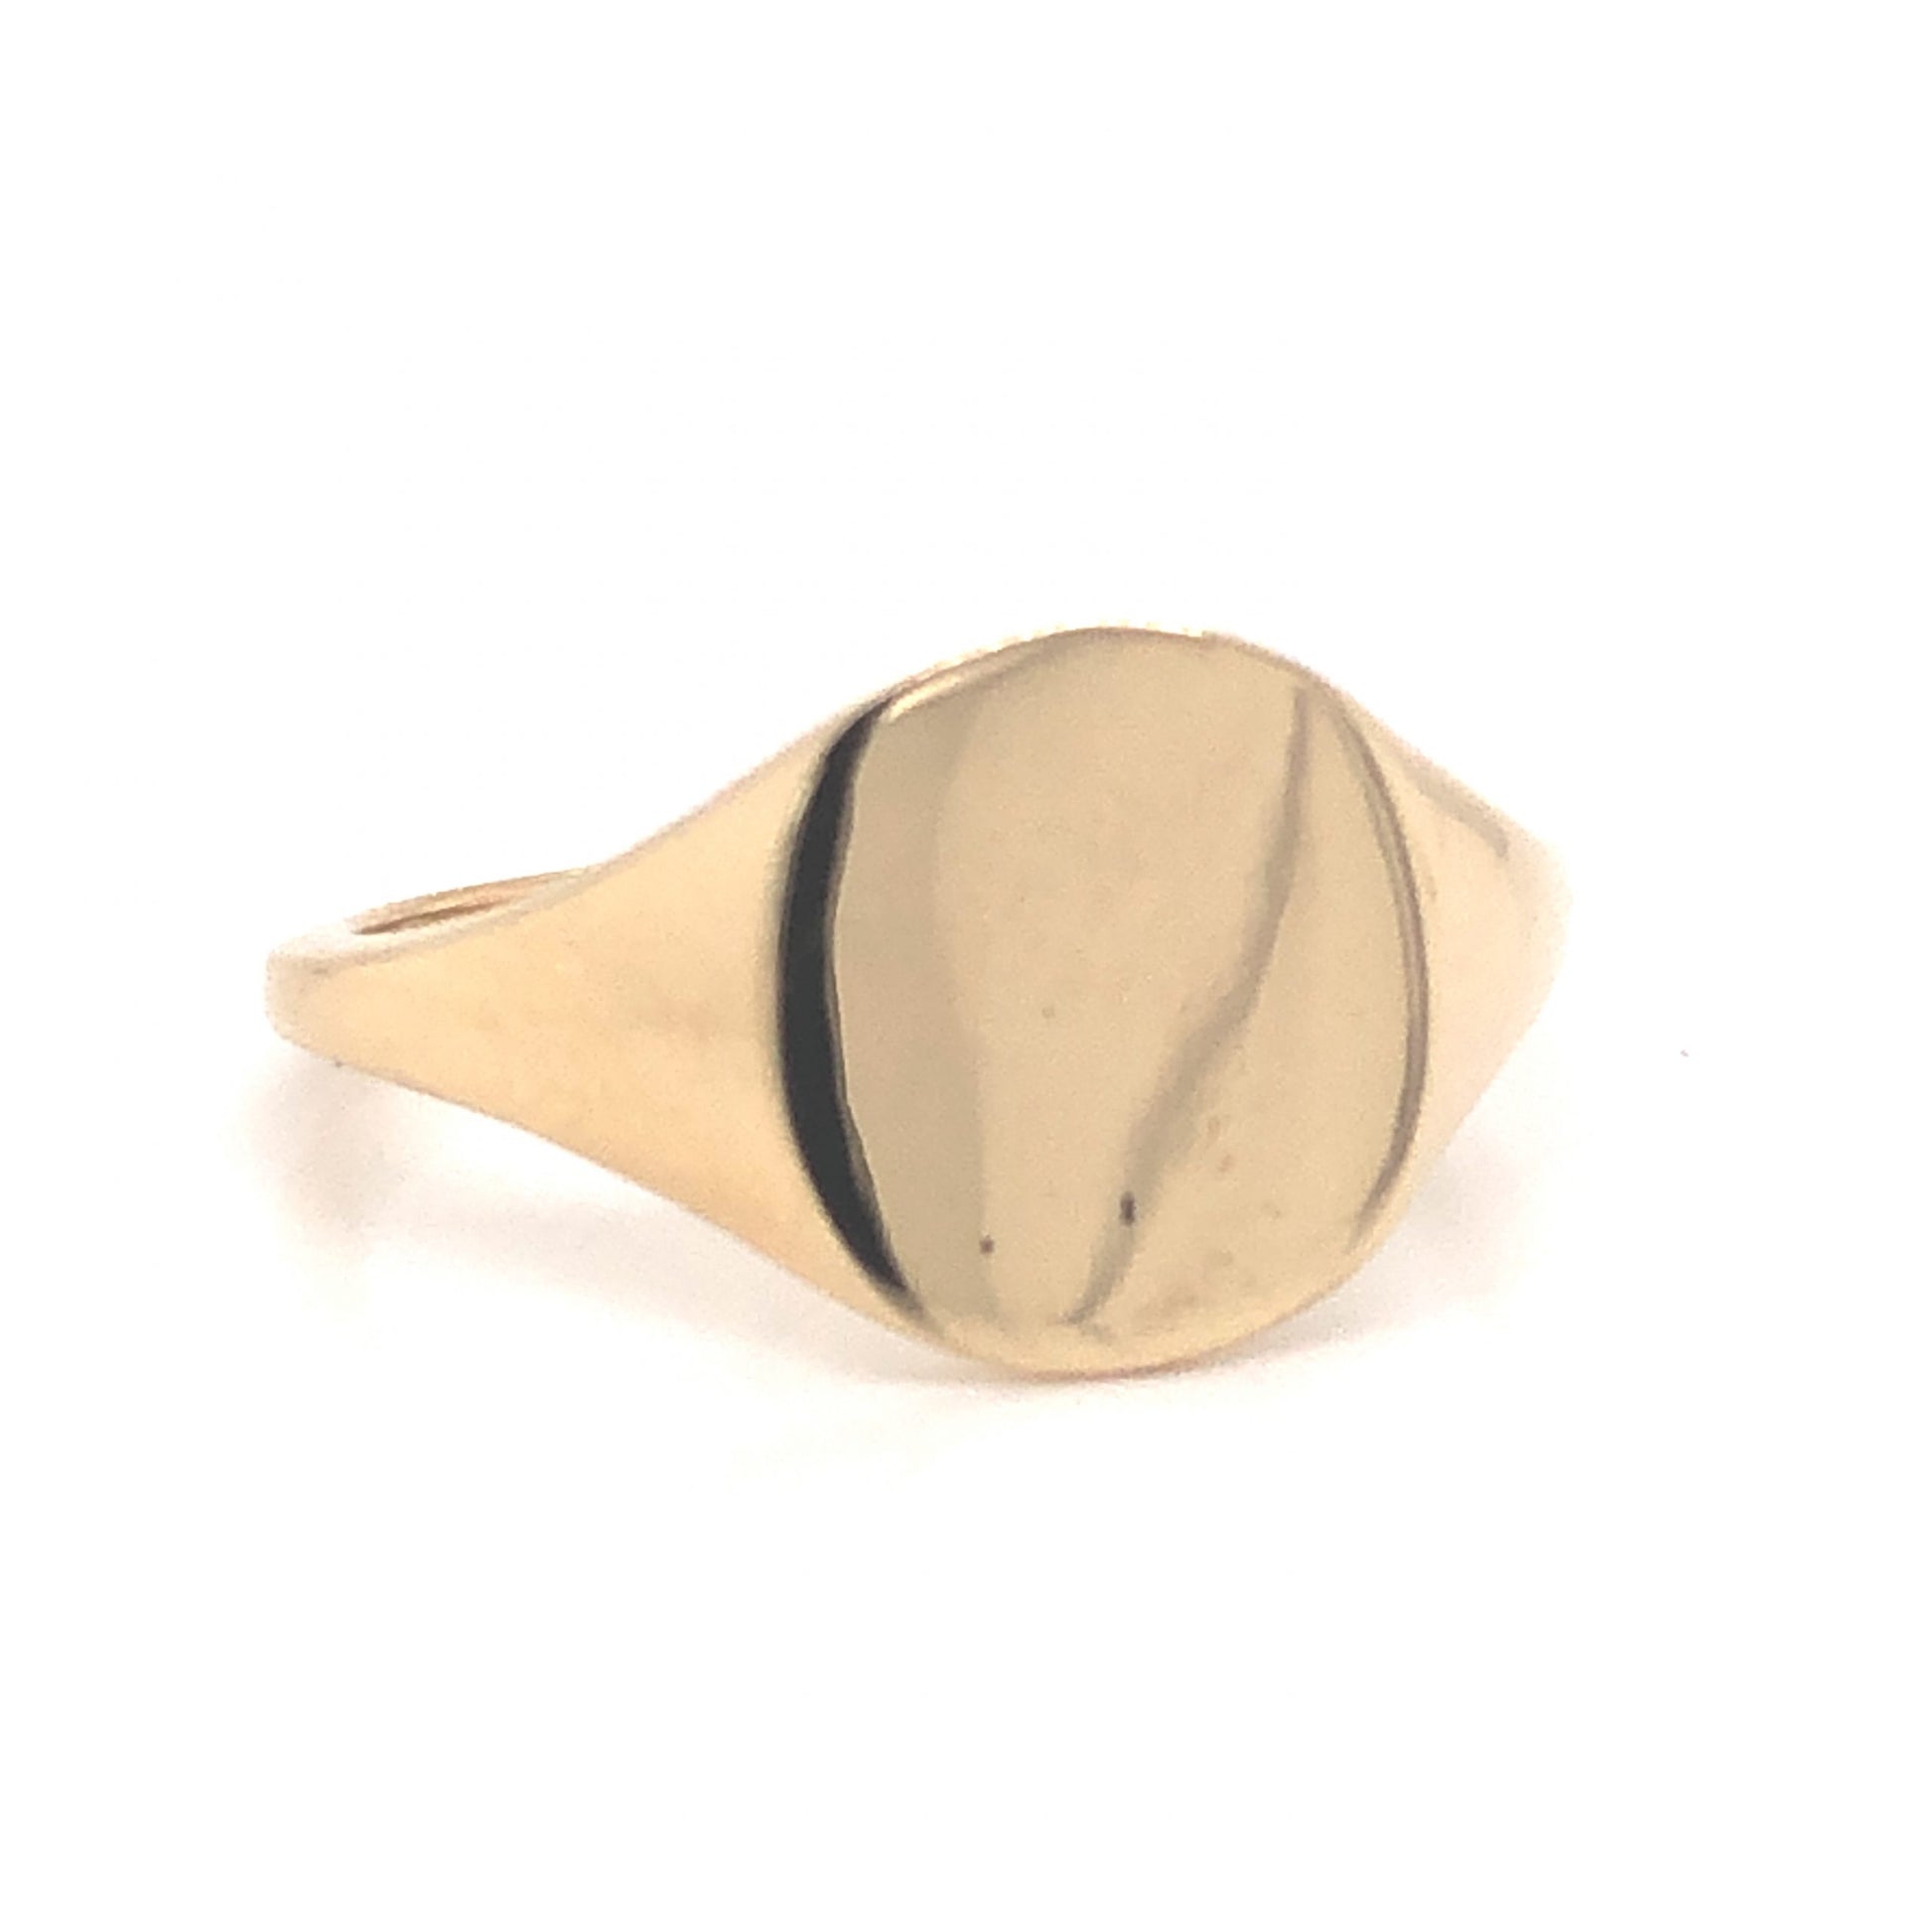 Modern Oval Signet Ring in 14k Yellow GoldComposition: Platinum Ring Size: 7 Total Gram Weight: 4.2 g Inscription: 14k
      